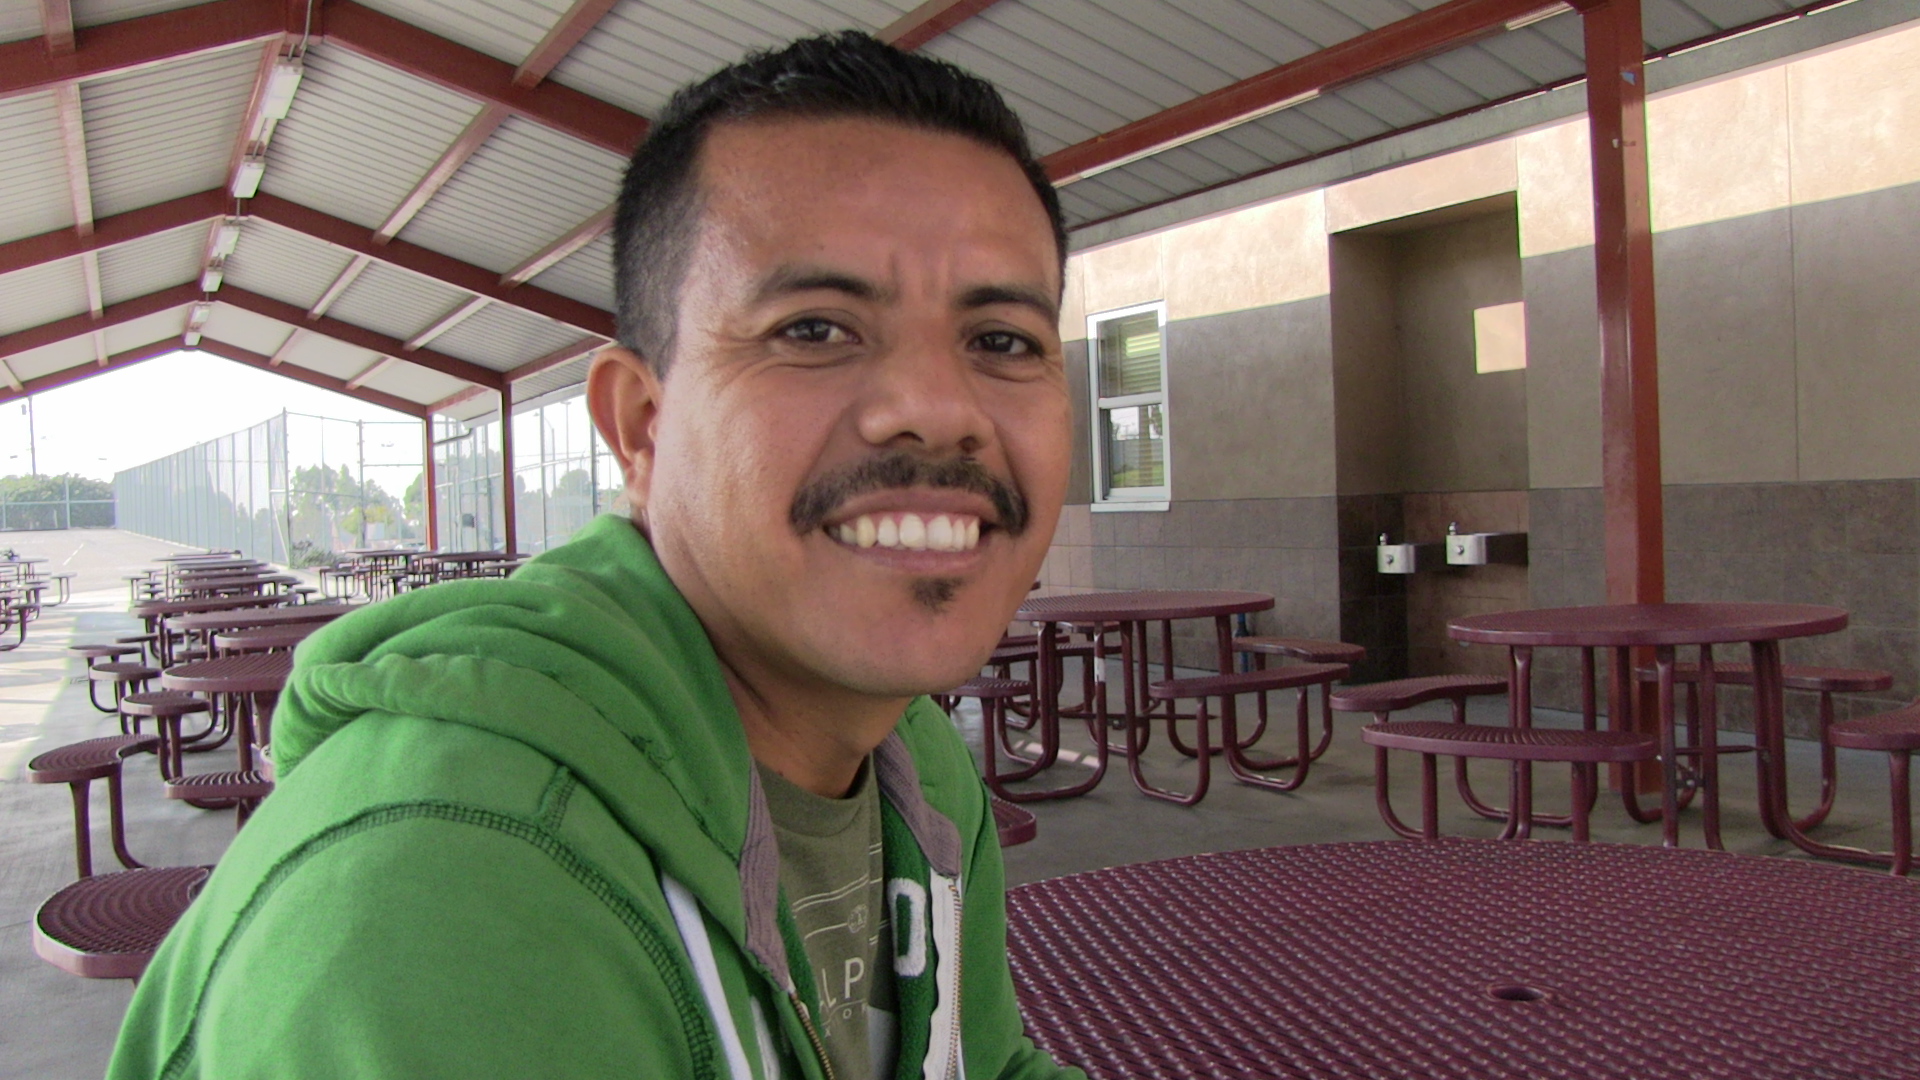 Alberto Arenas, a chef at the popular San Diego restaurant, C Level, has two boys at Cherokee Point. Since he works at night, he spends most days at the school, helping teachers and talking with other parents. "I just want to spend  more time with my kids. I'm here for two hours. At recess time, I go outside and play with them. I think they feel more comfortable." 